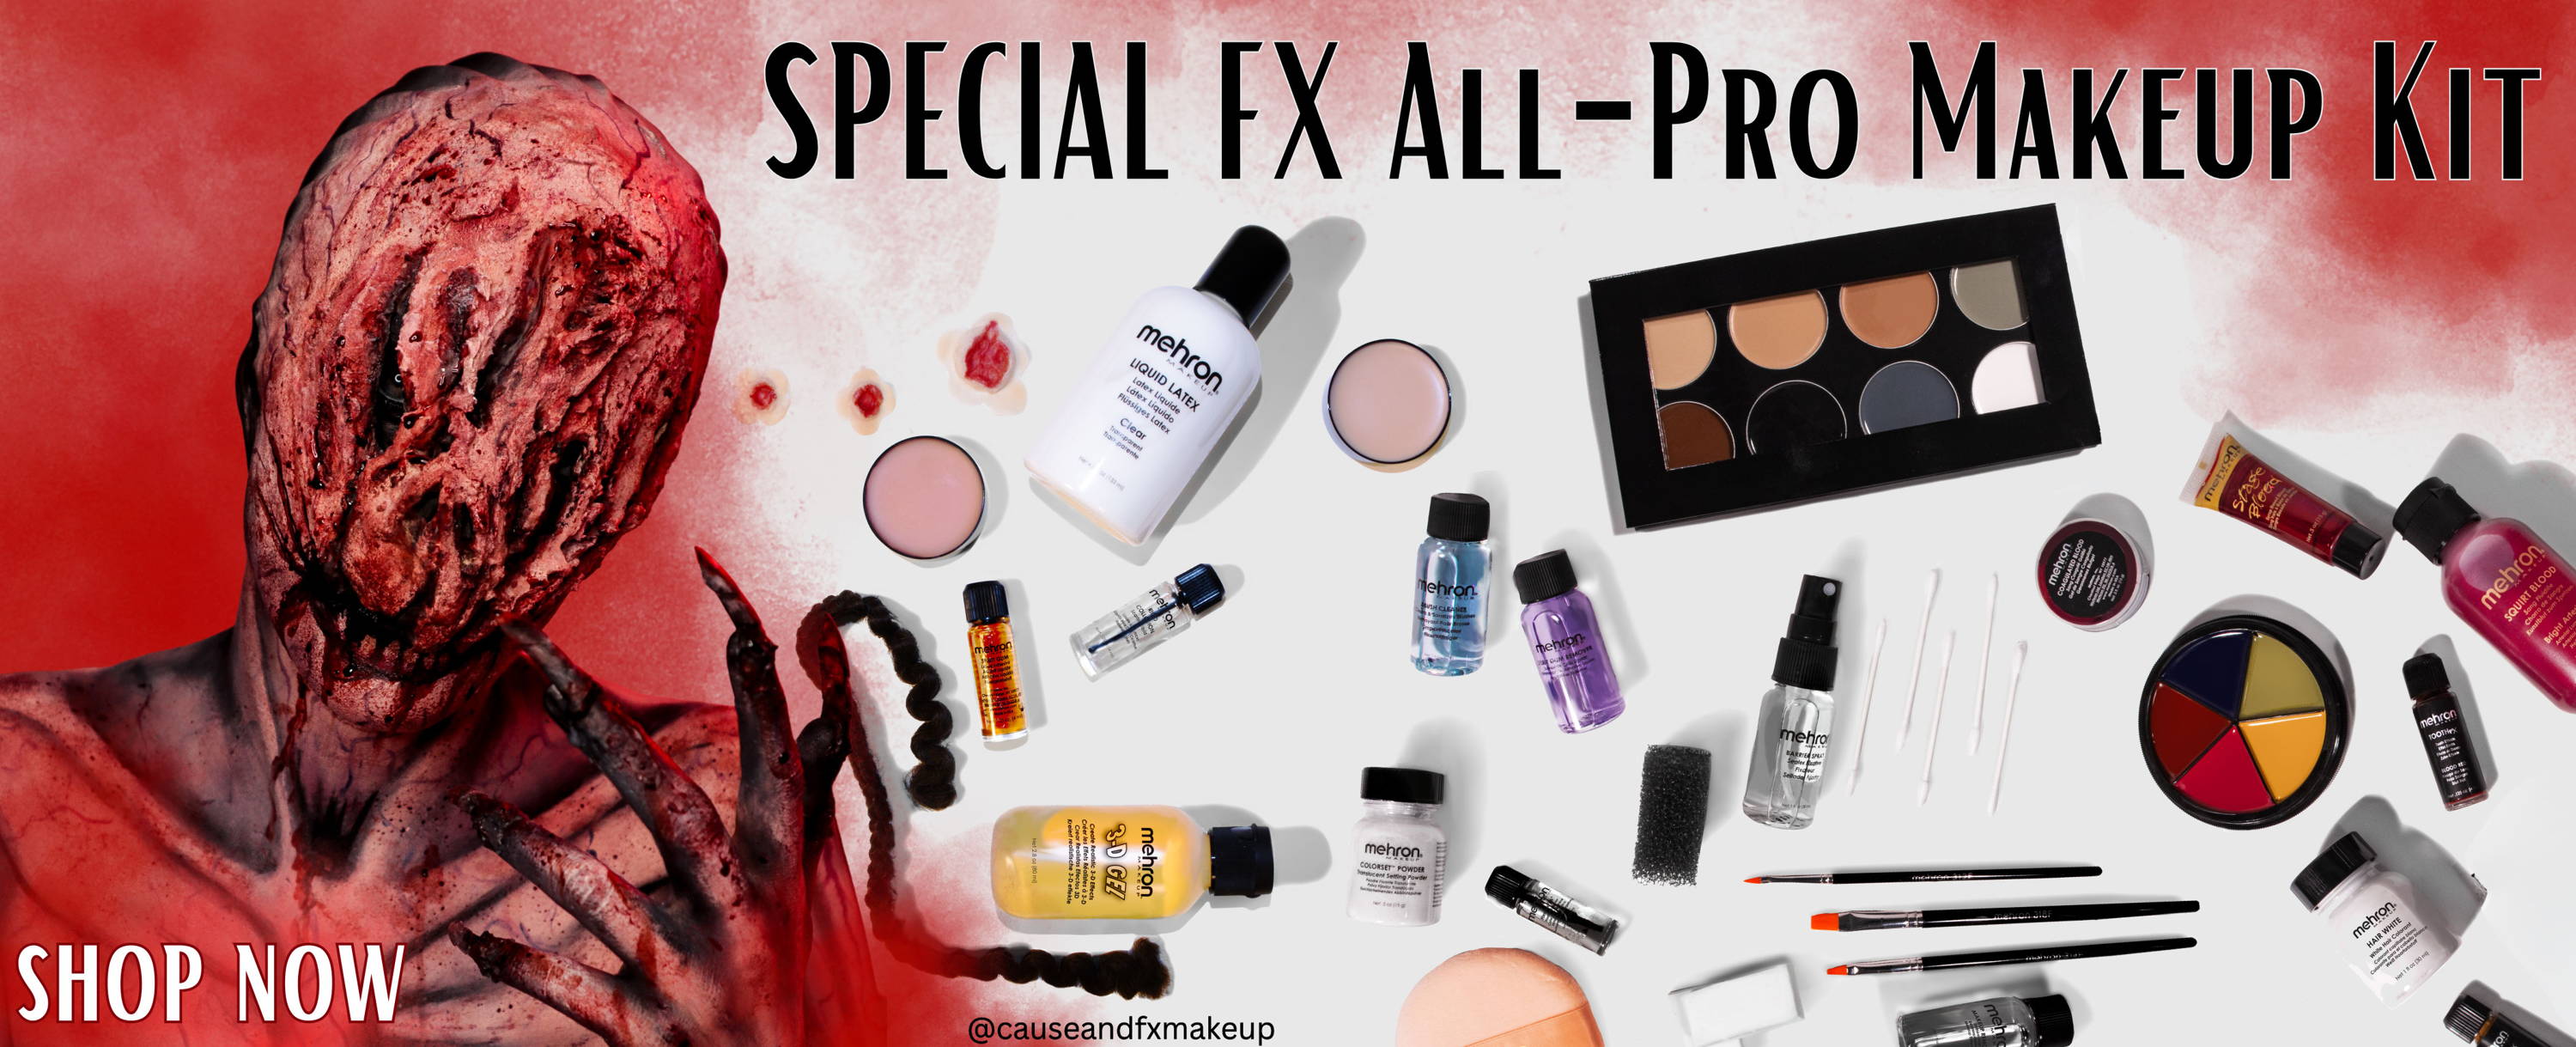 image of scary monster surrounded by special FX makeup products and title 